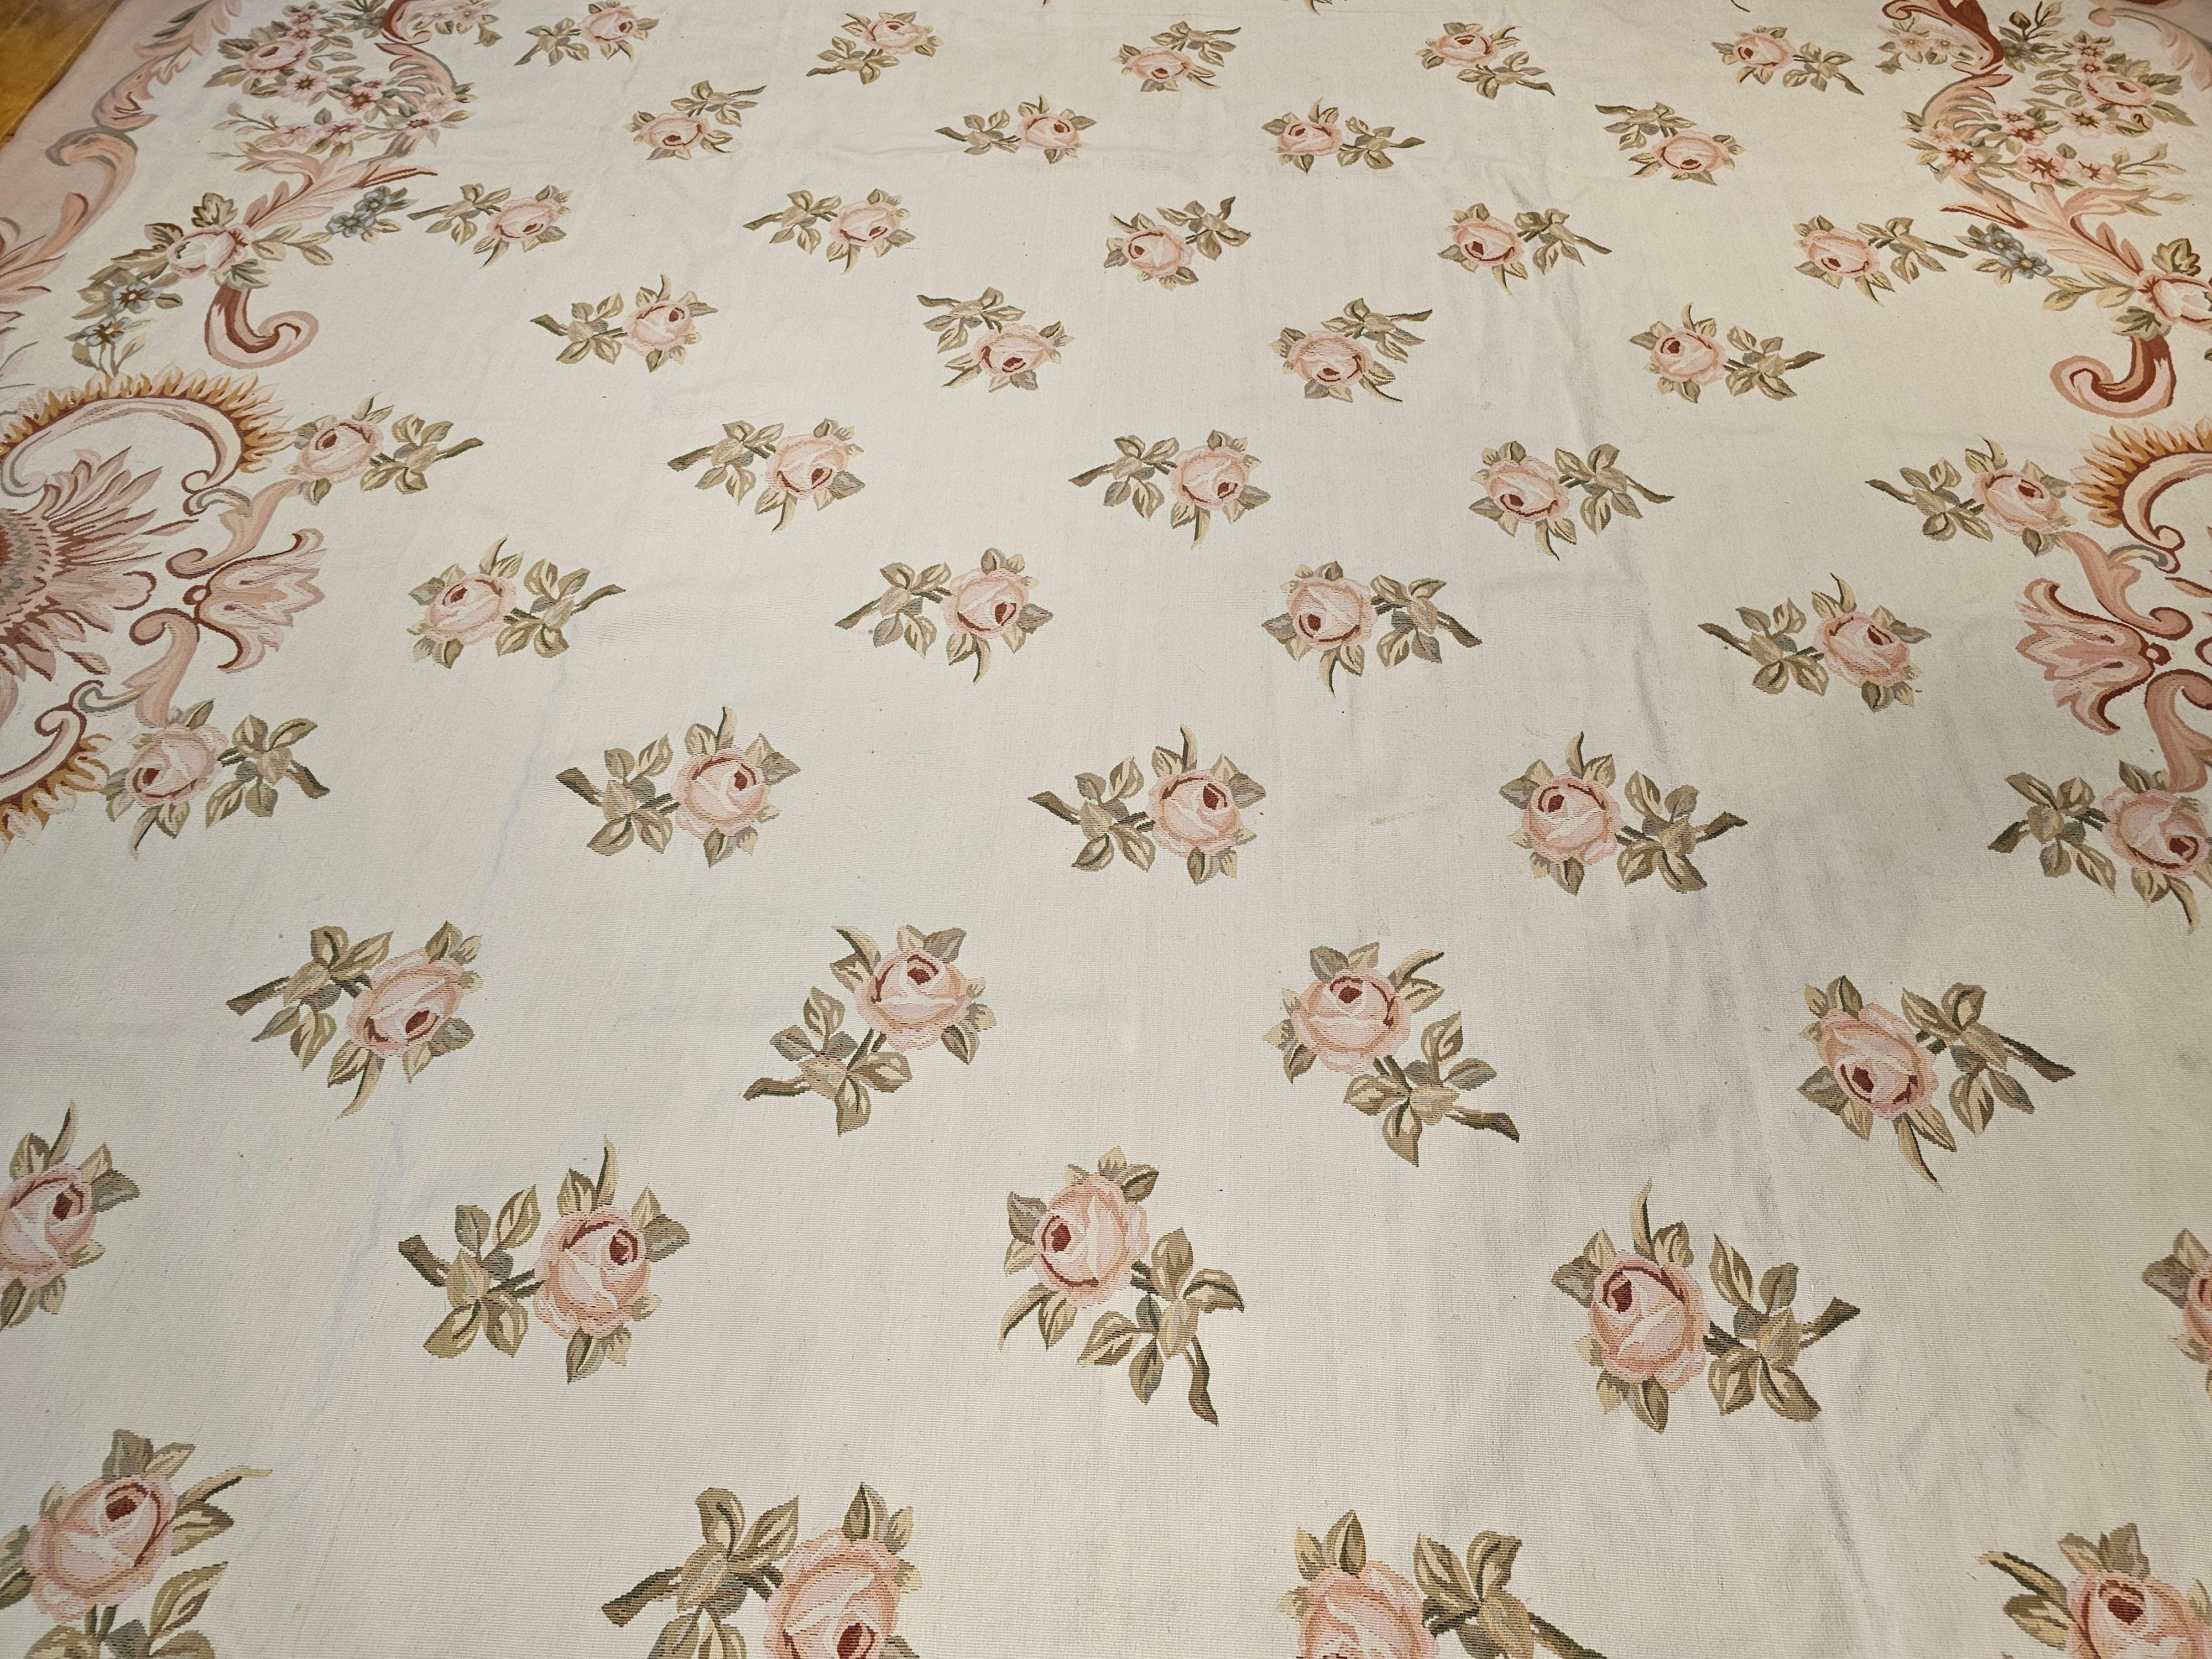 Vintage Oversized Aubusson Design Carpet in Light Taupe, Sage, Pale Blue, Pink In Good Condition For Sale In Barrington, IL